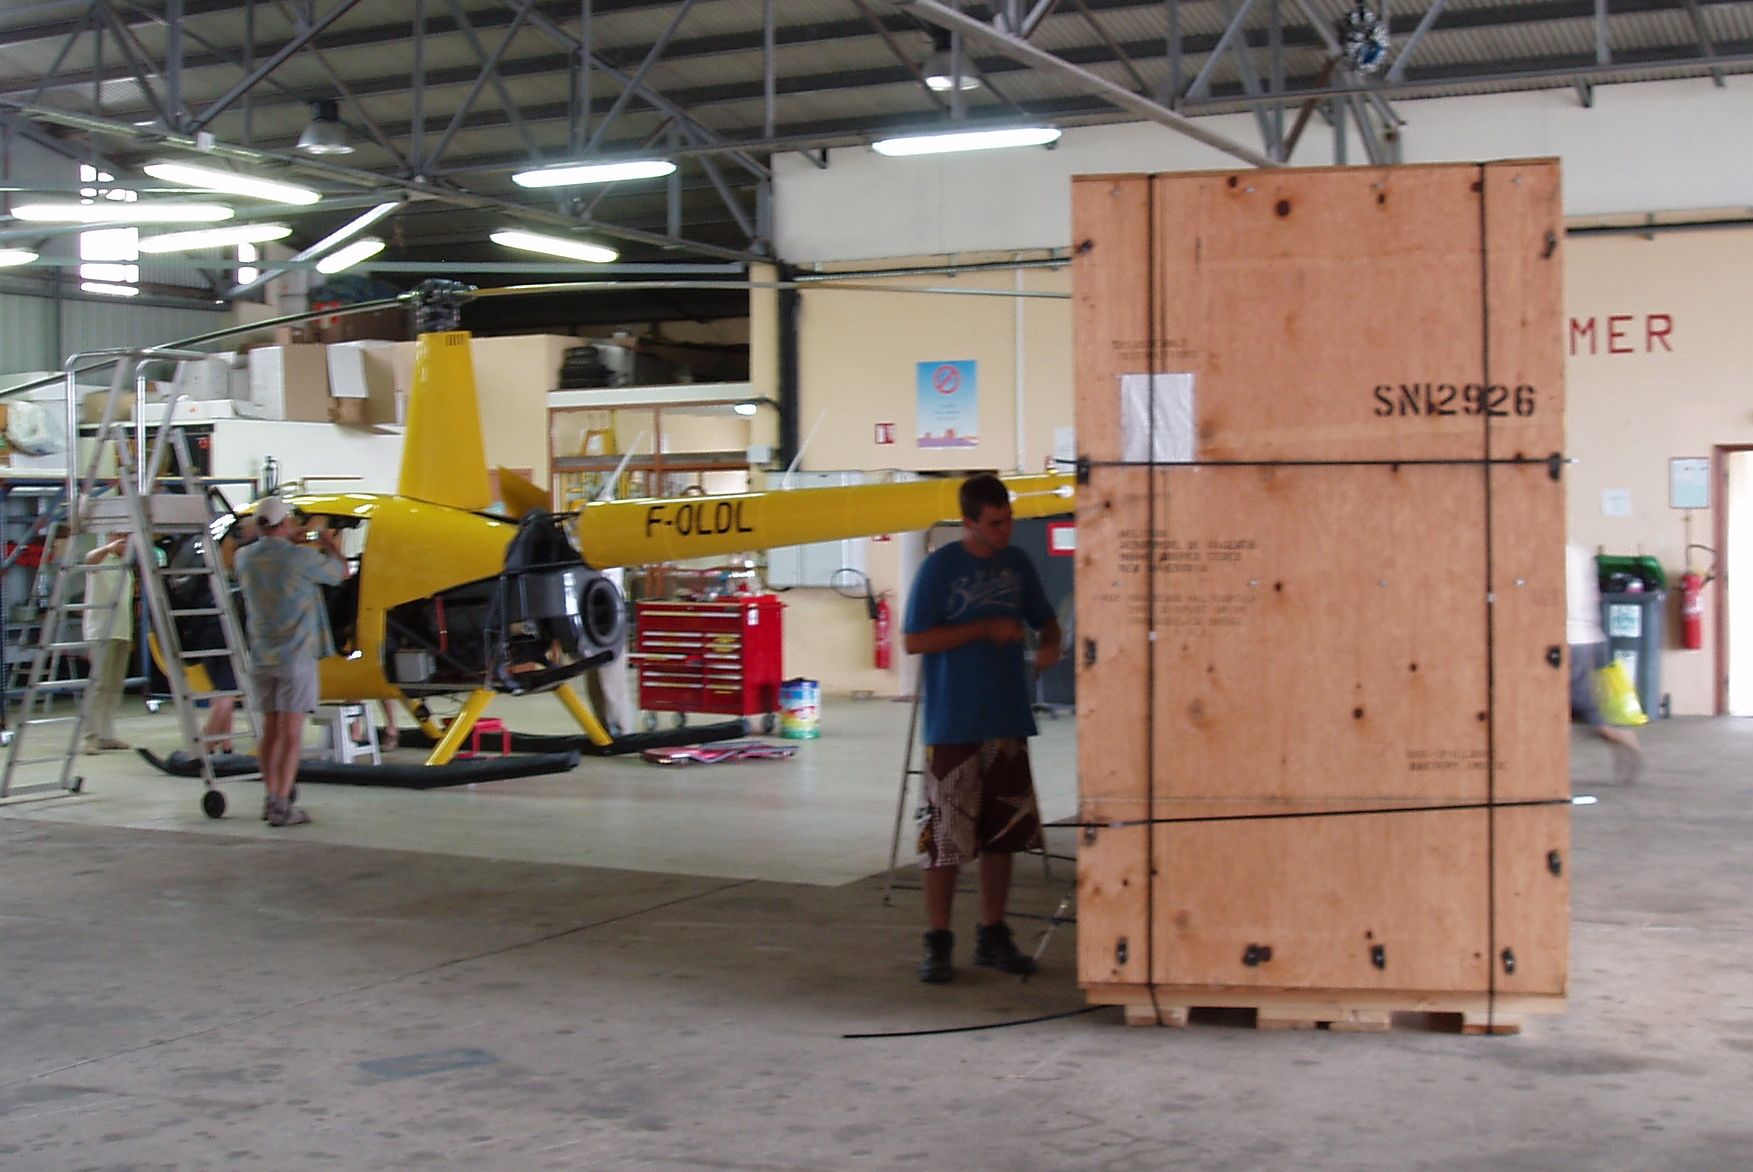 New R44 in a box